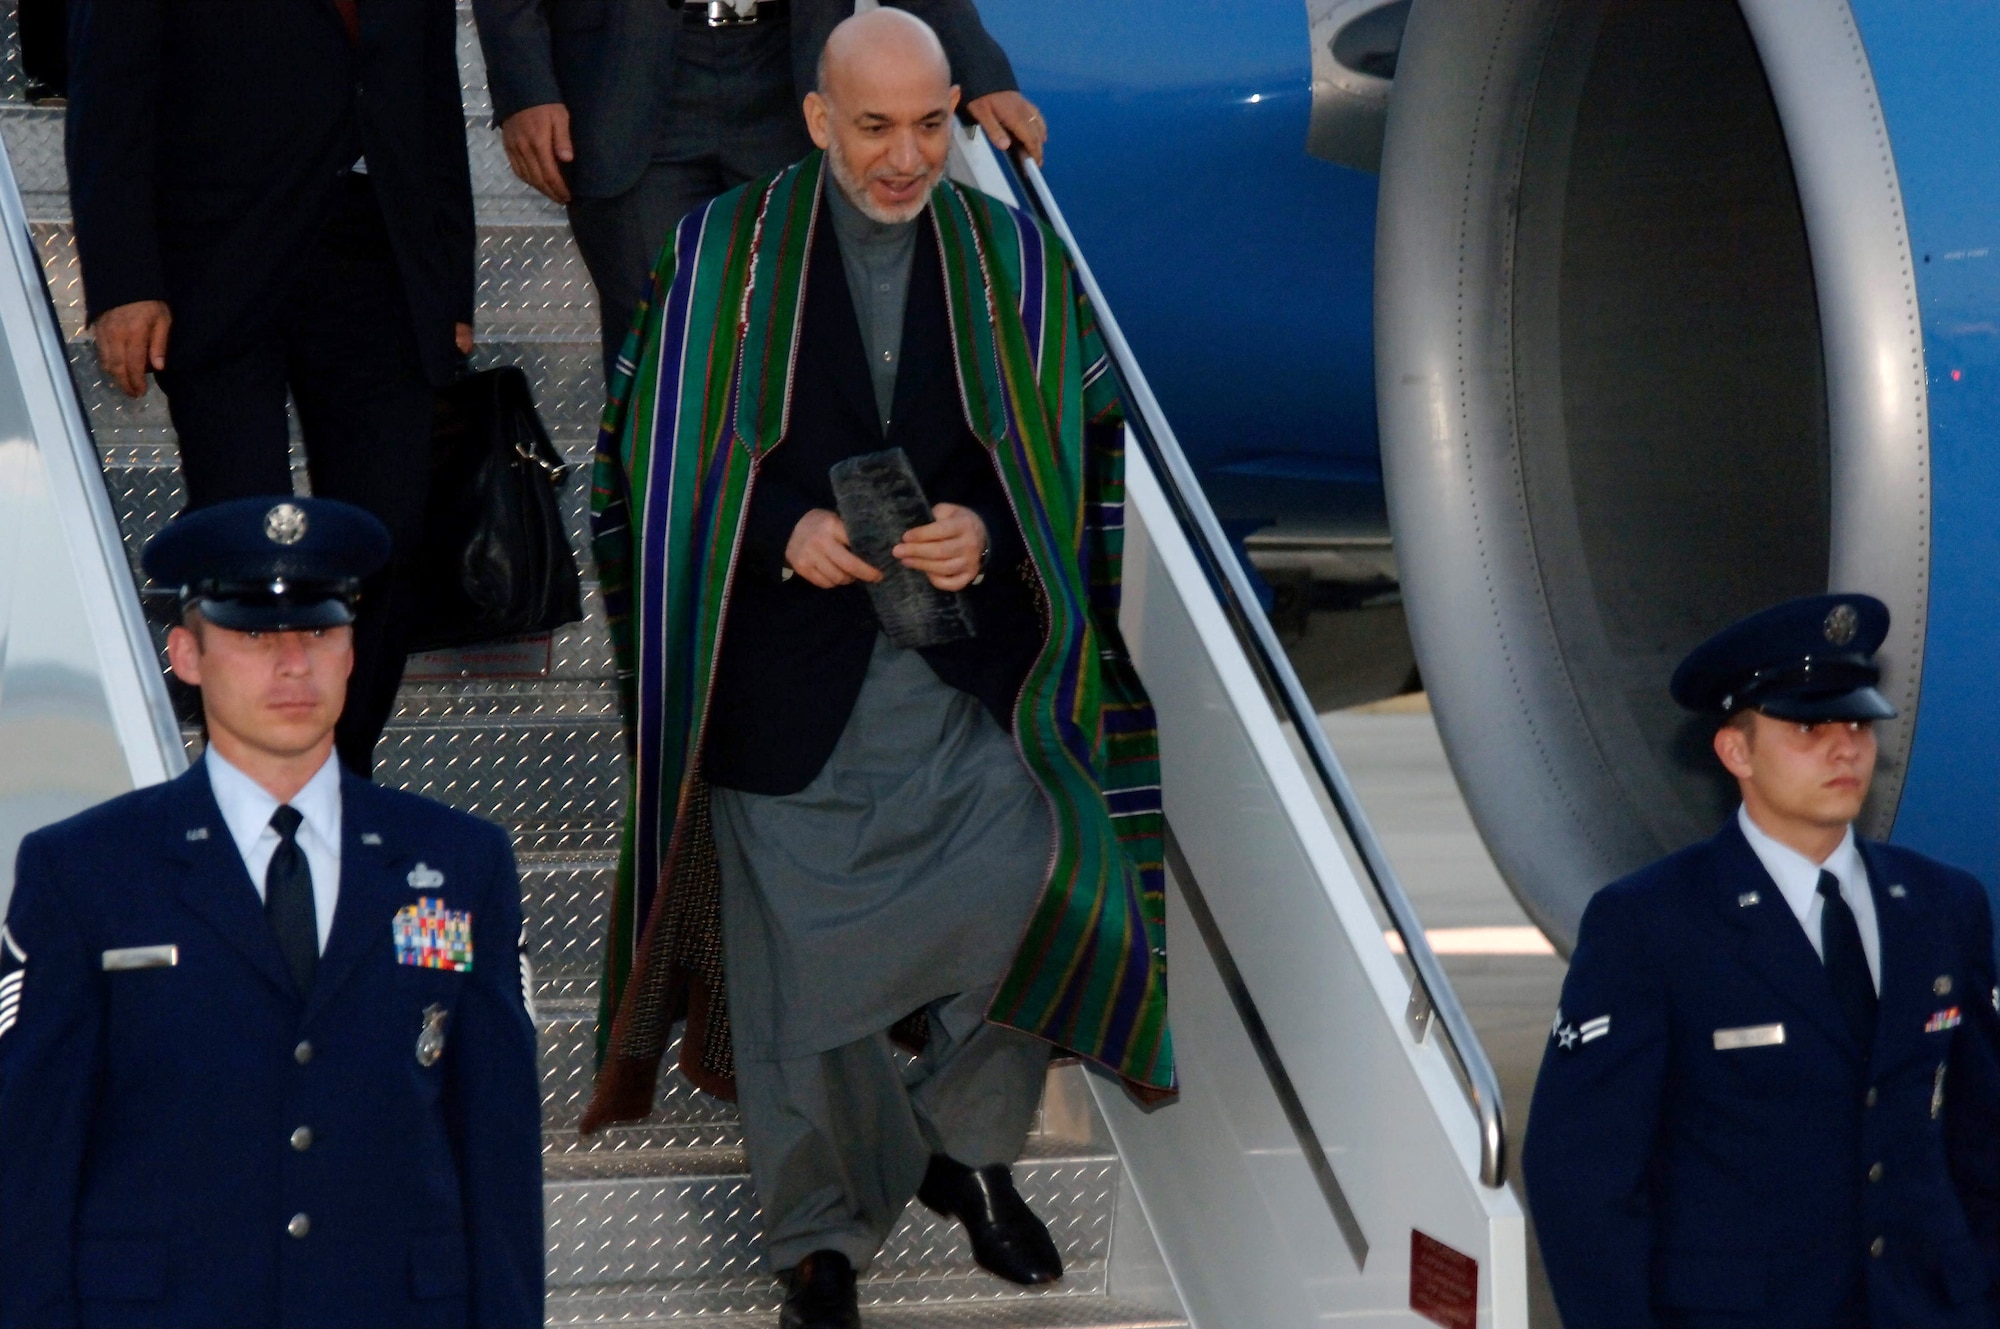 Afghanistan's President Hamid Karzai exits an aircraft on the flightline at MacDill Air Force Base, Fla., Sept. 26. President Karzai visited with the commander of United States Central Command during his visit to the United States this week. (U.S. Air Force photo/Senior Airman Jason Robertson)
